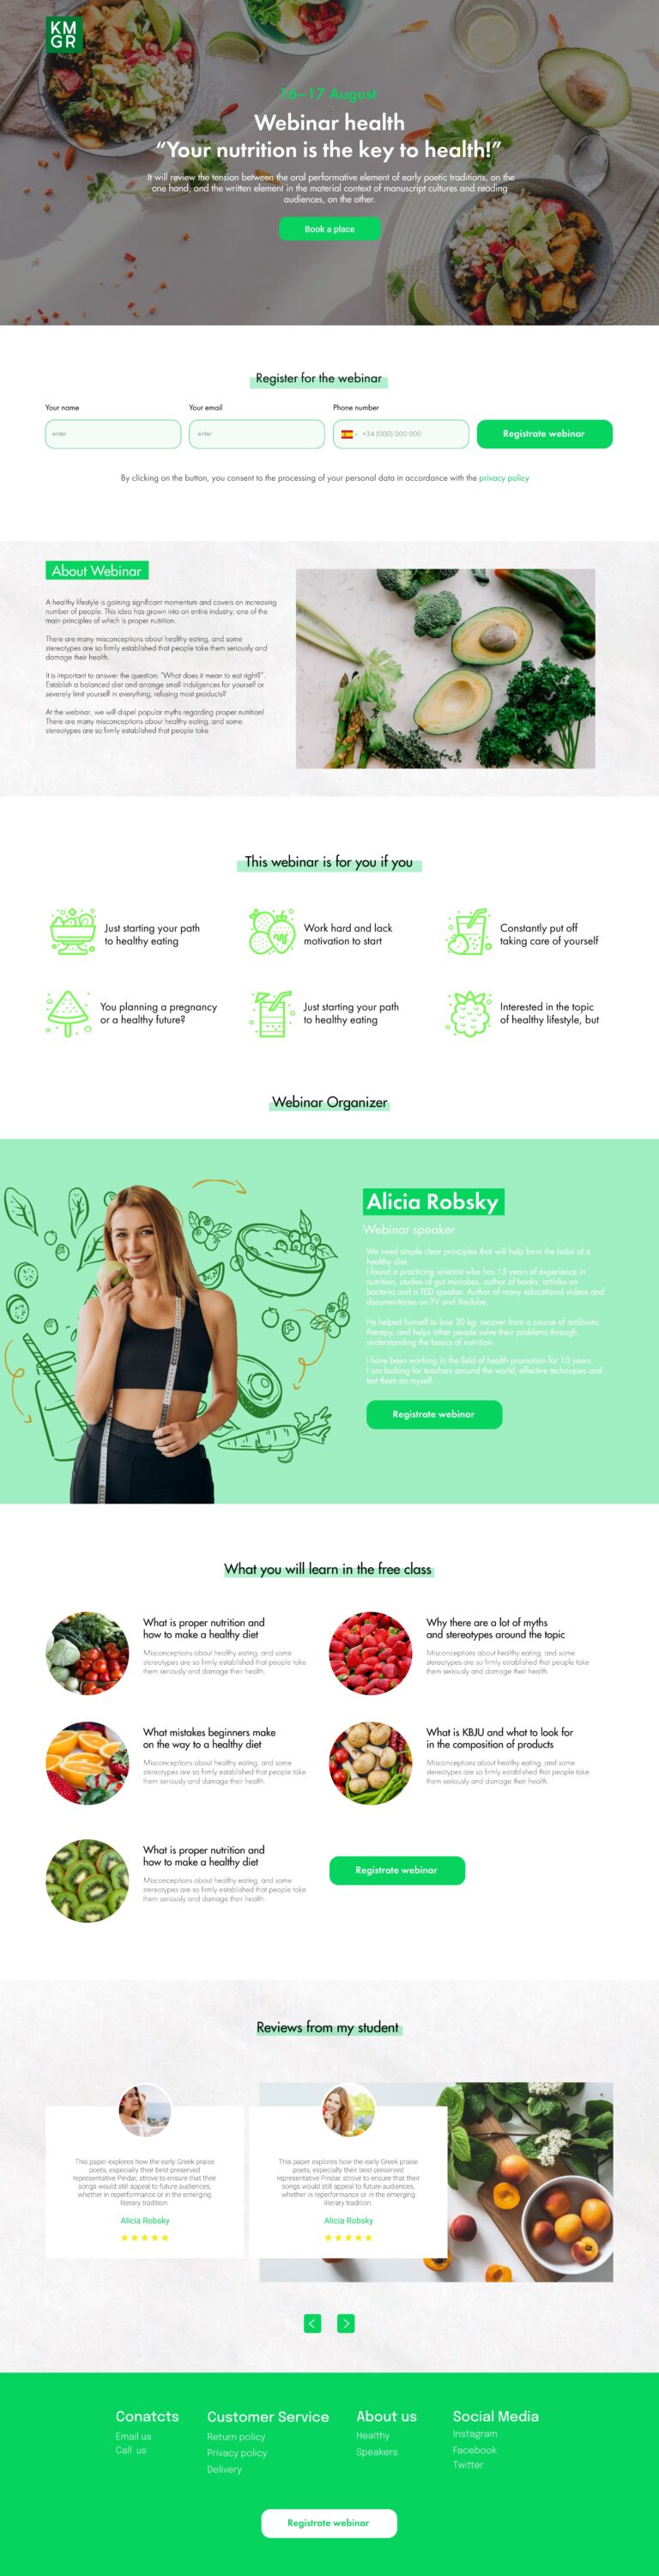 Green page for online education.